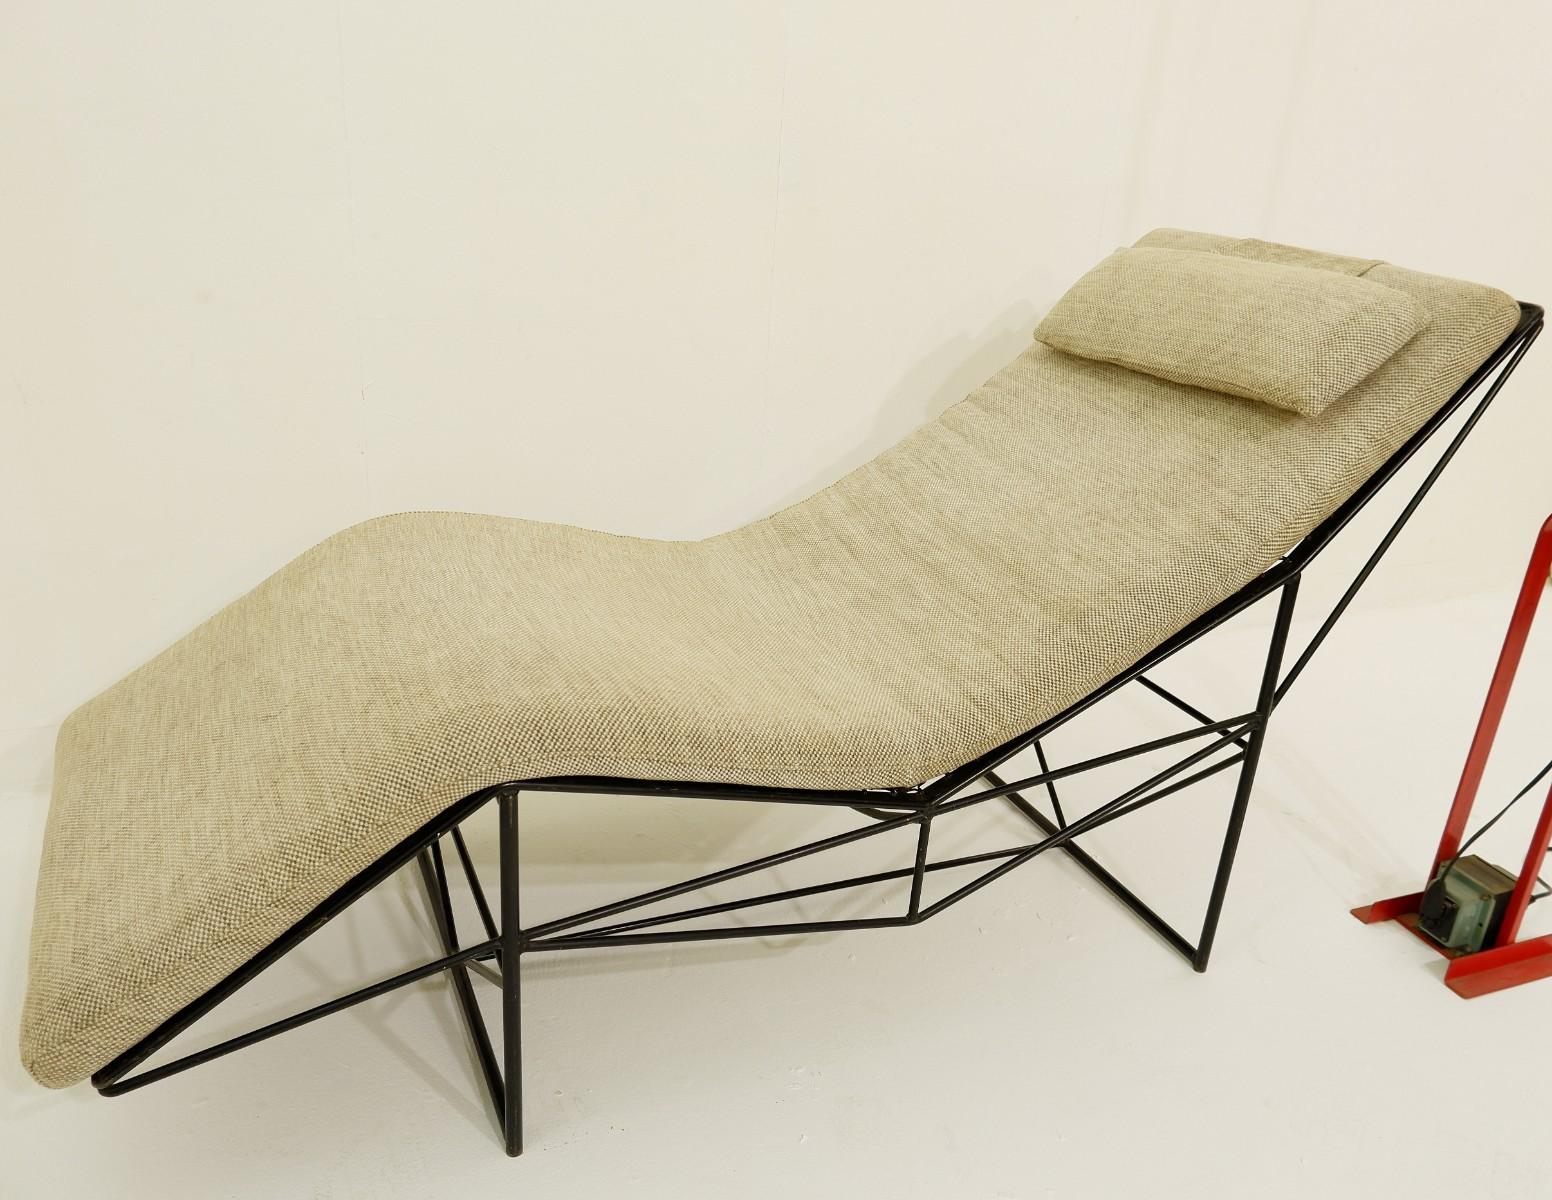 European Chaise Longue by Paolo Passerini for Uvet, 1985